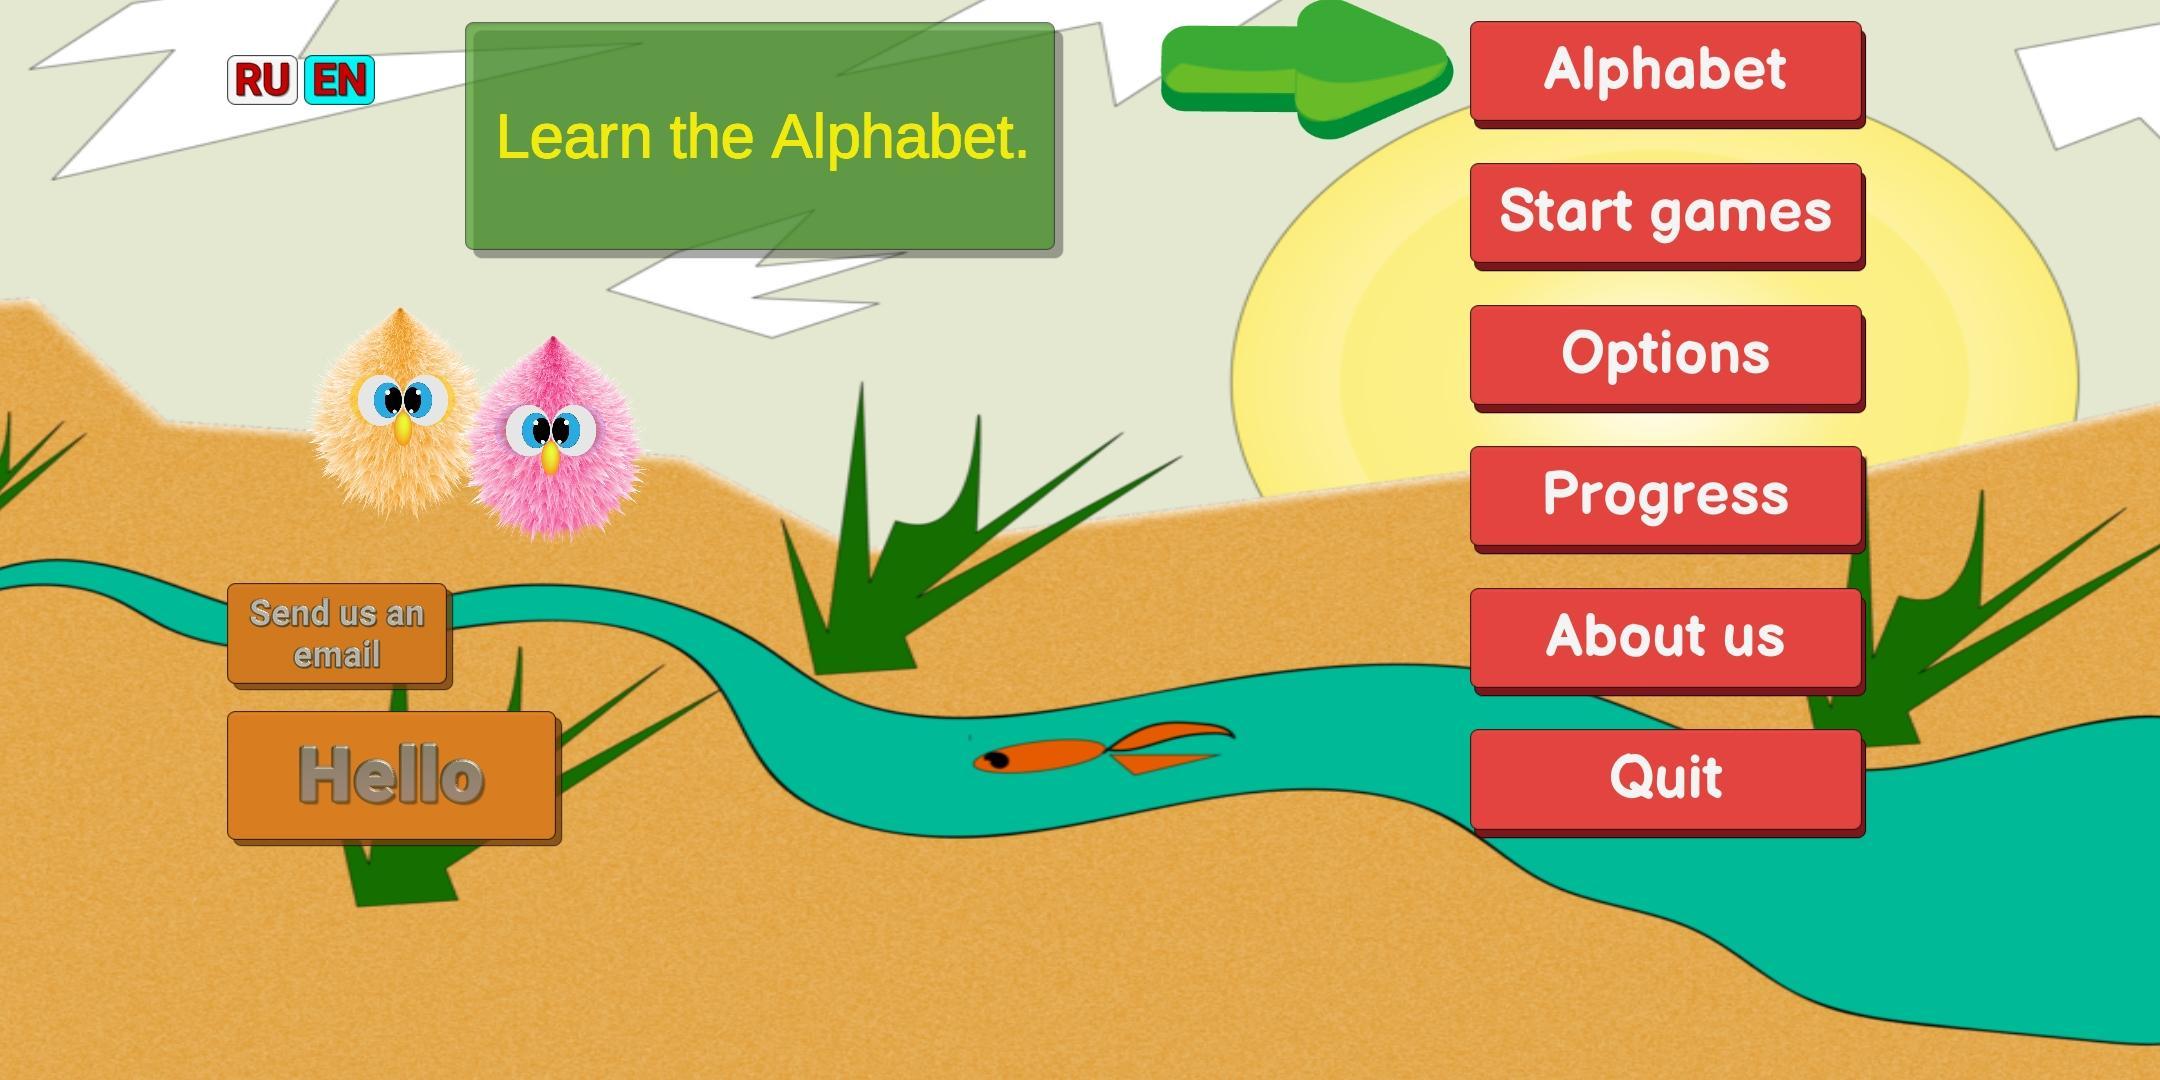 Russian alphabet learning with letter games 1.9 Screenshot 2